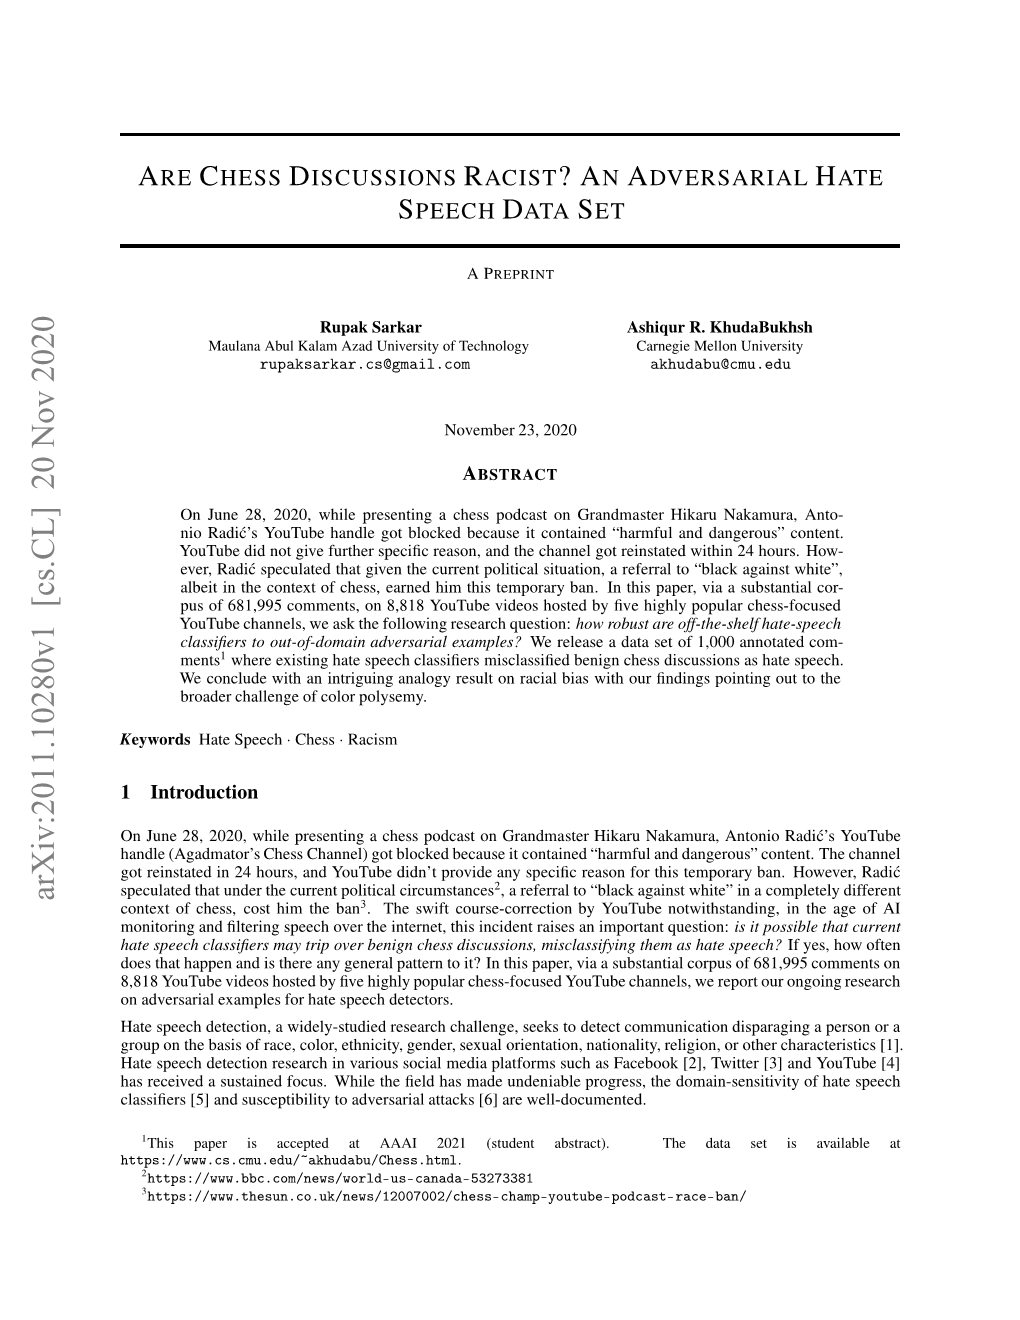 Are Chess Discussions Racist? an Adversarial Hate Speech Data Set APREPRINT